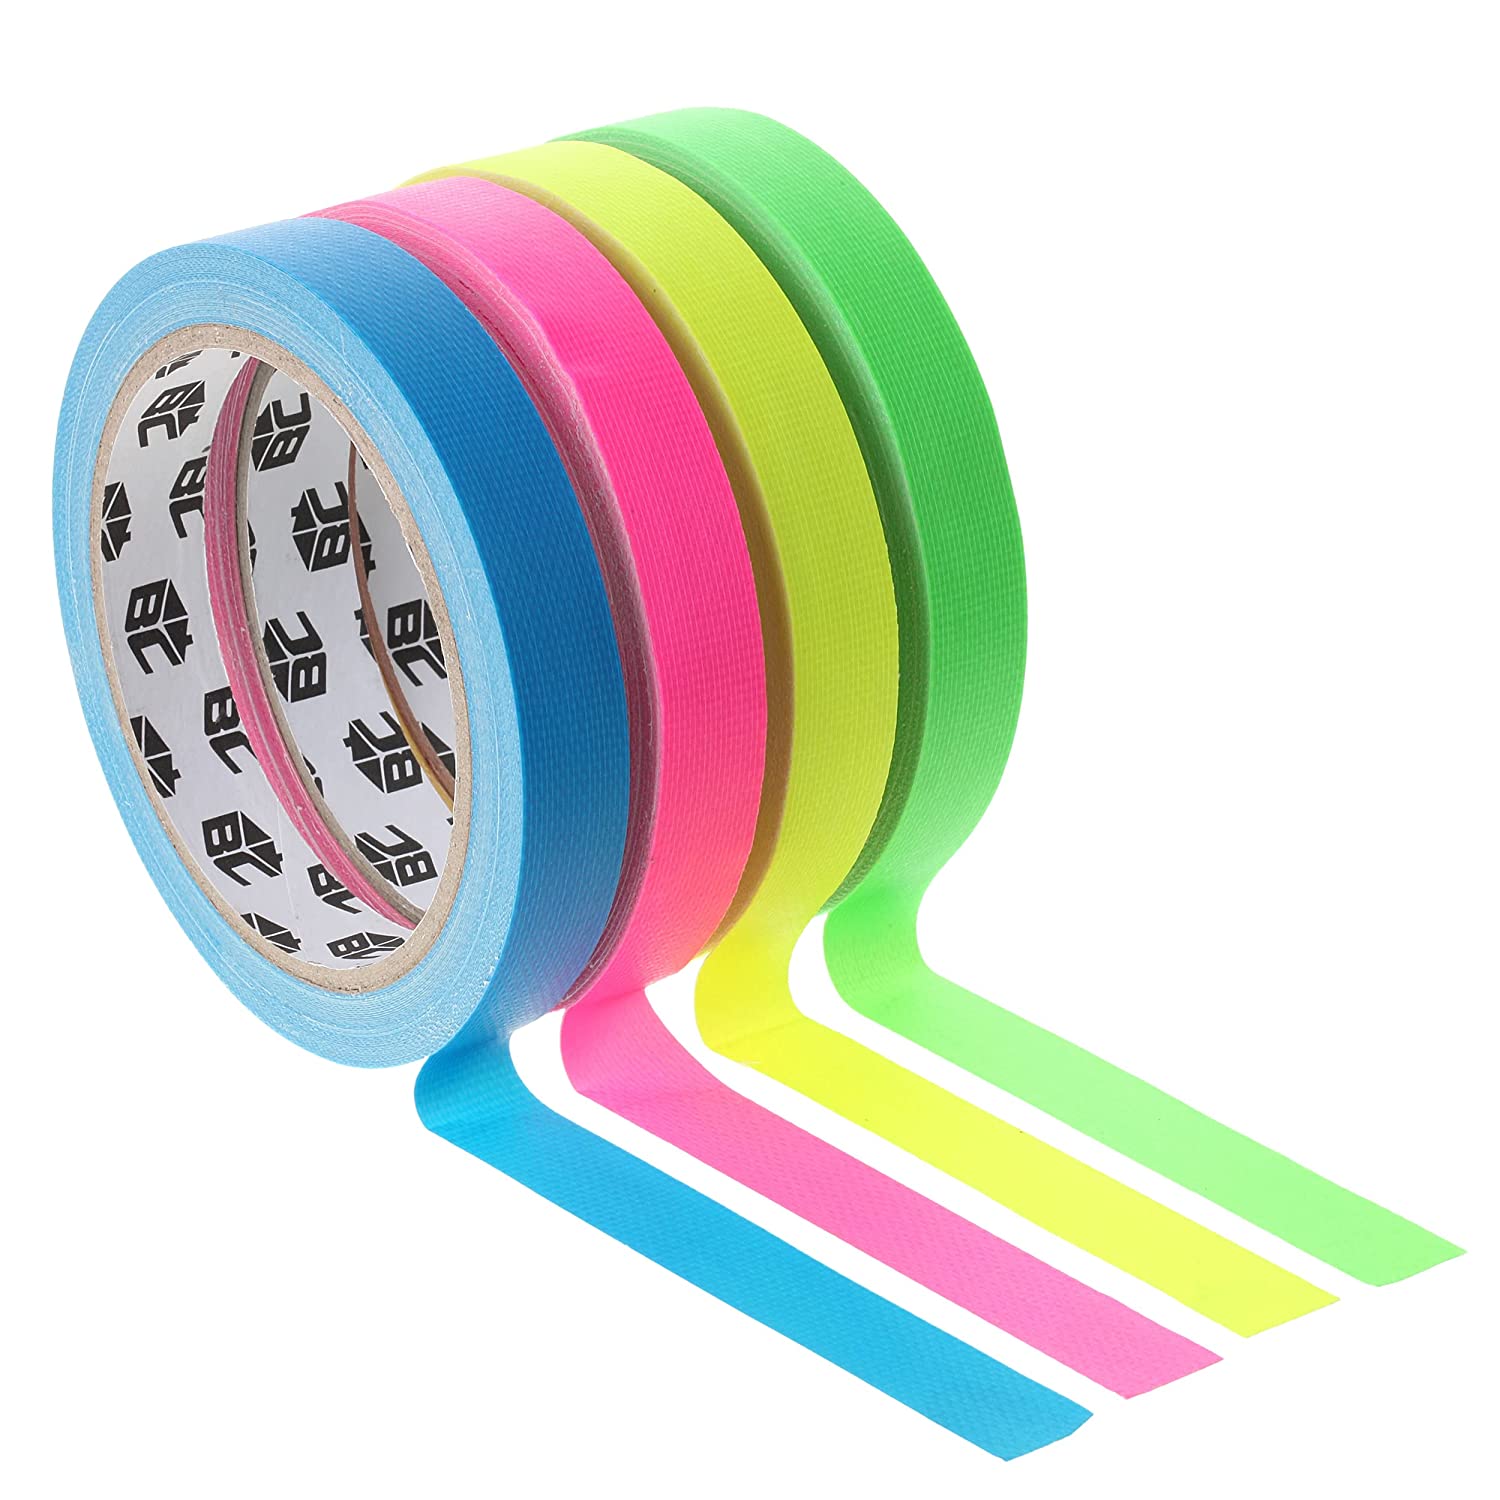 Bates- Colored Gaffers Tape, 4 Pack, Neon Colors, 0.65 Inch x 11